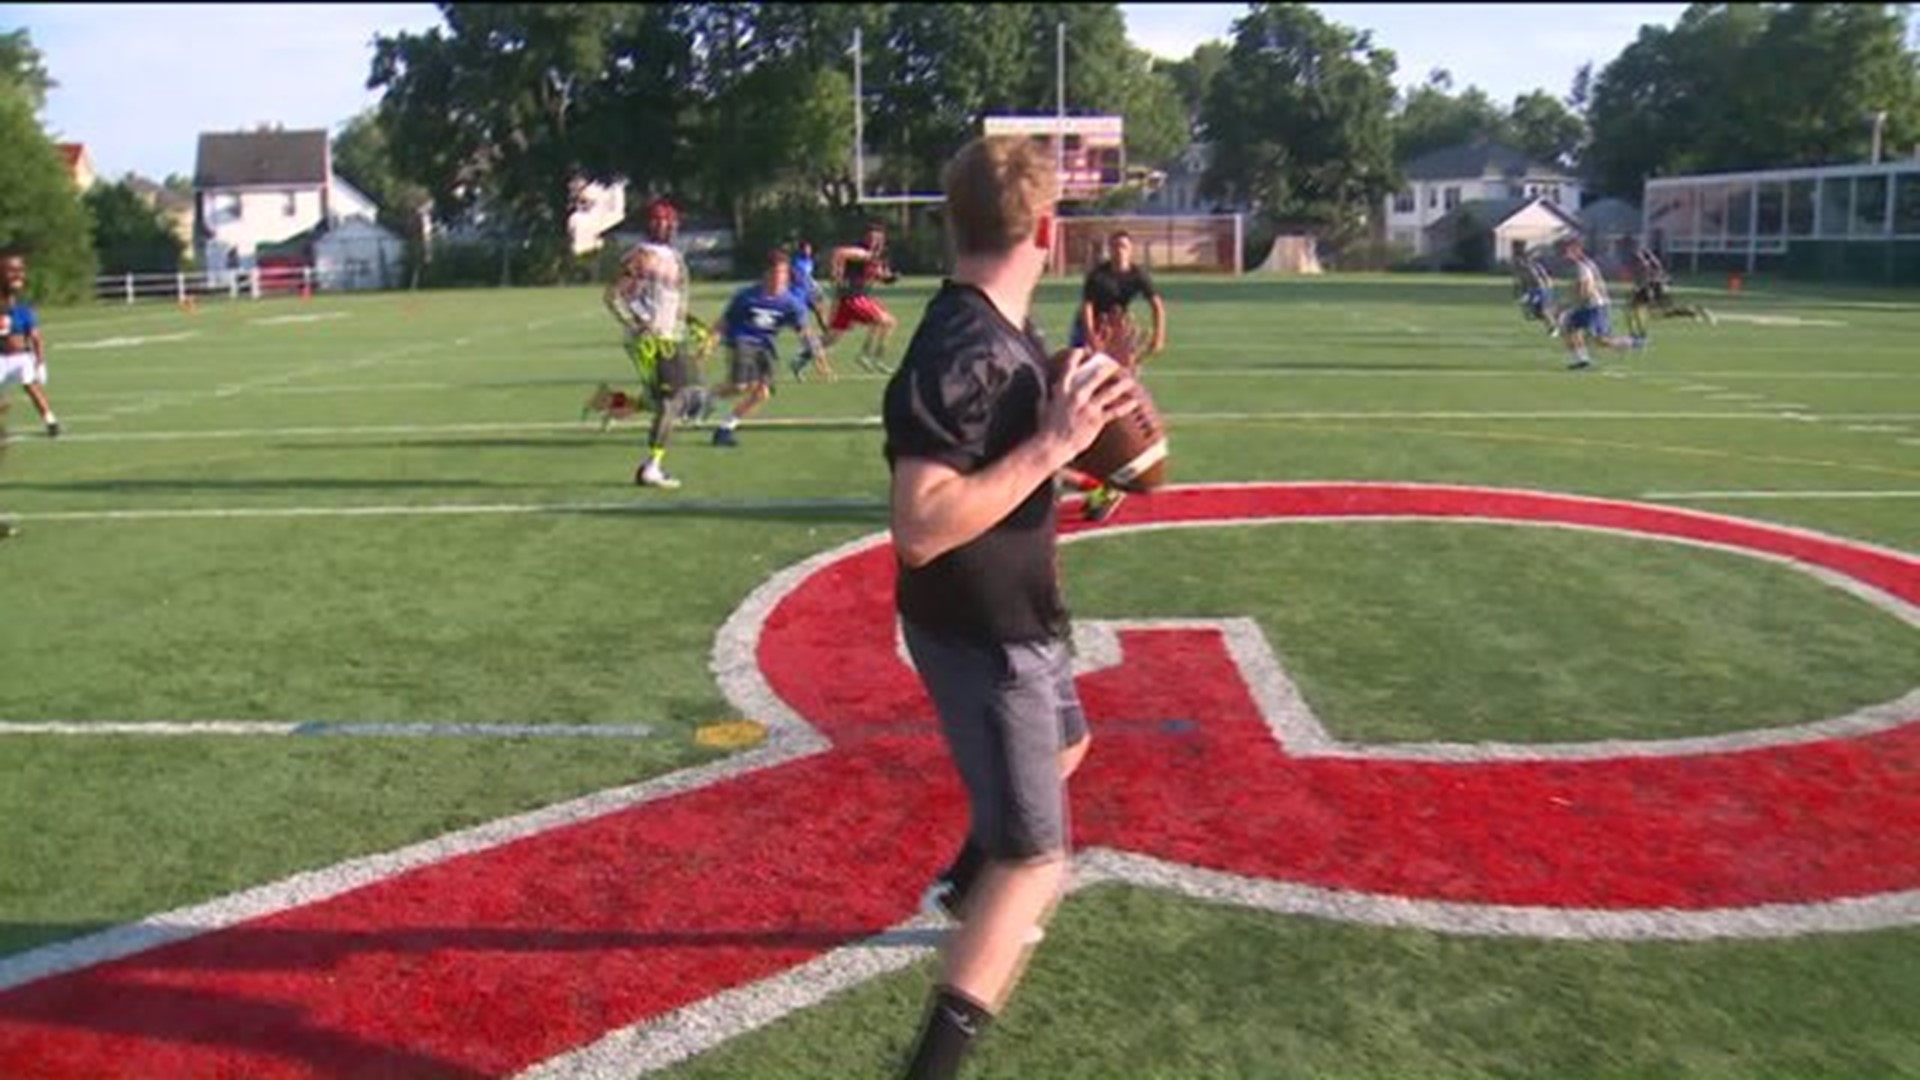 Local football players, fans discuss latest developments in Deflategate